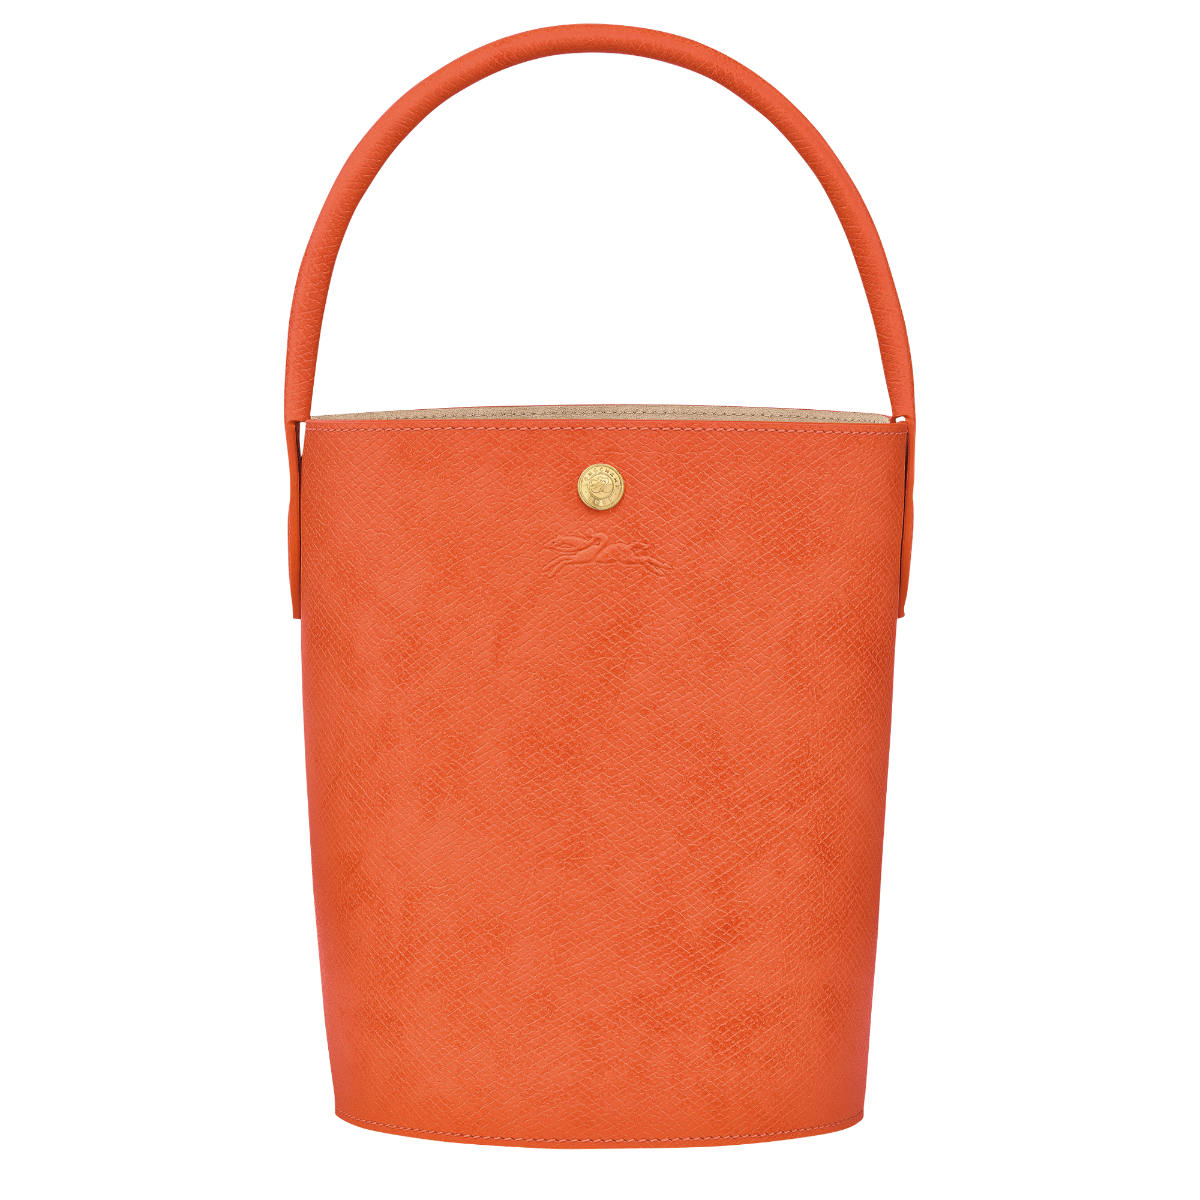 The Longchamp Bucket Is Back With A New Name: Epure